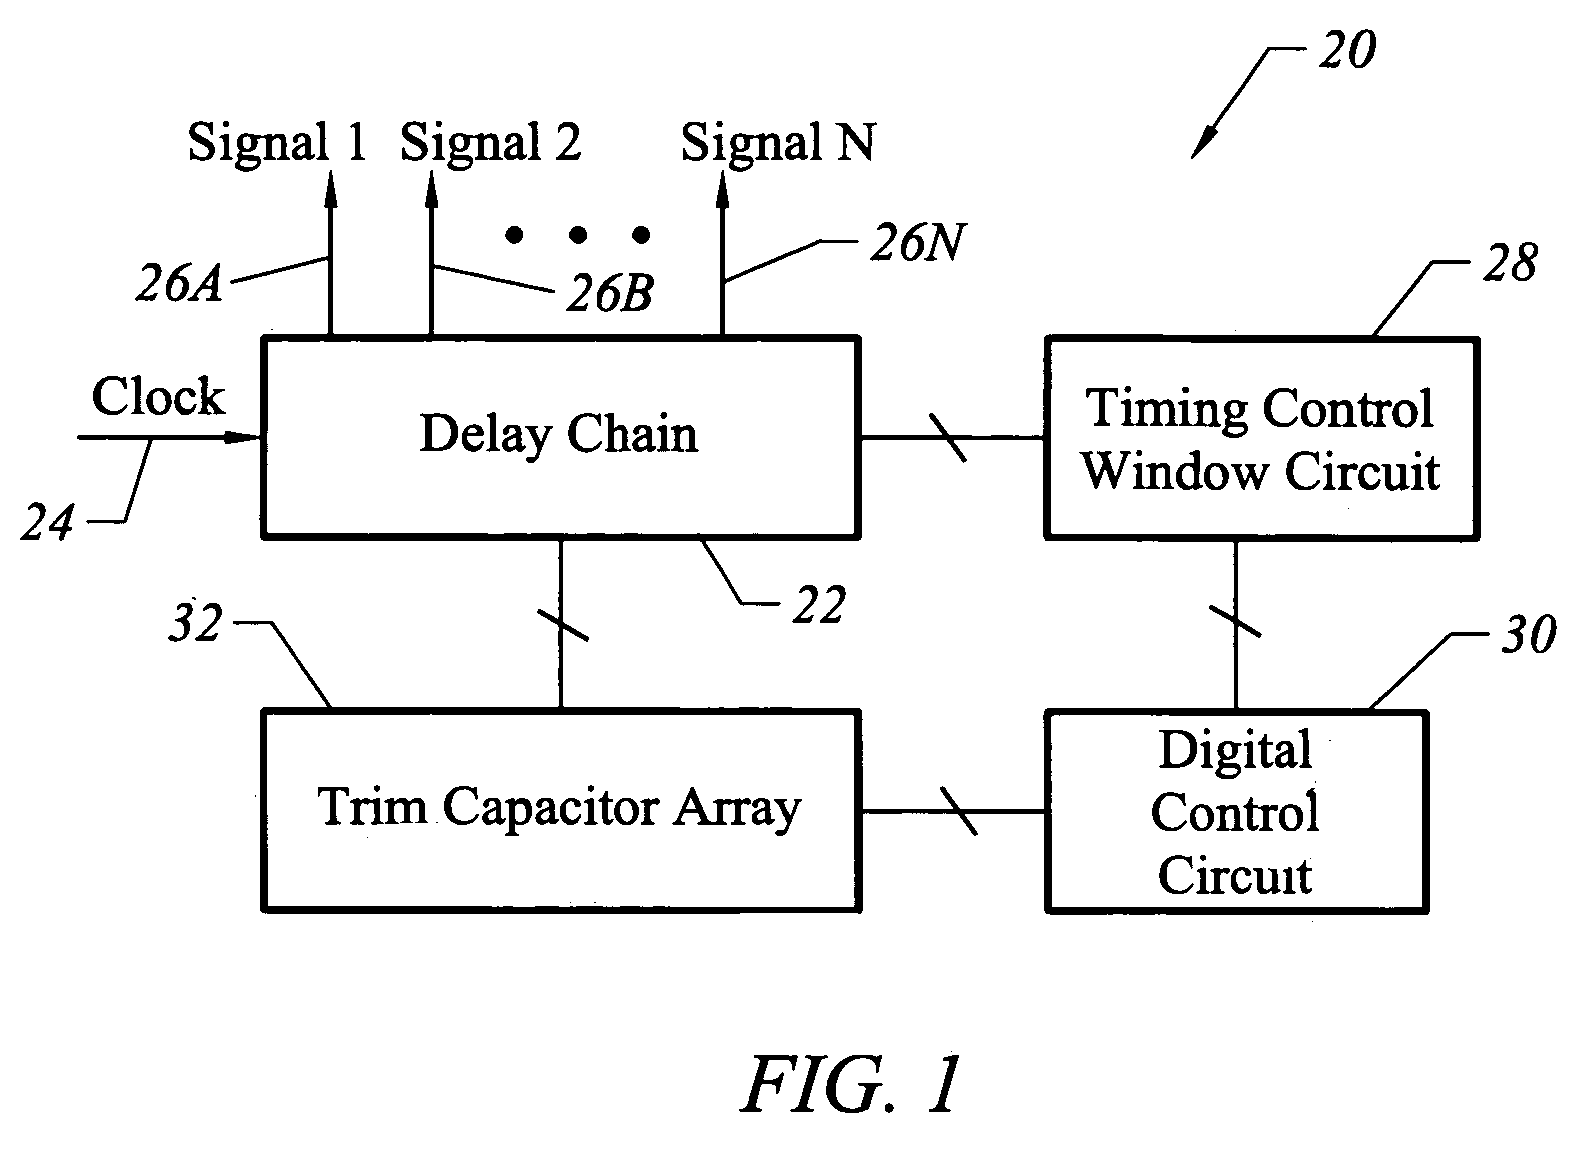 Apparatus and method for generating multi-phase signals with digitally controlled trim capacitors